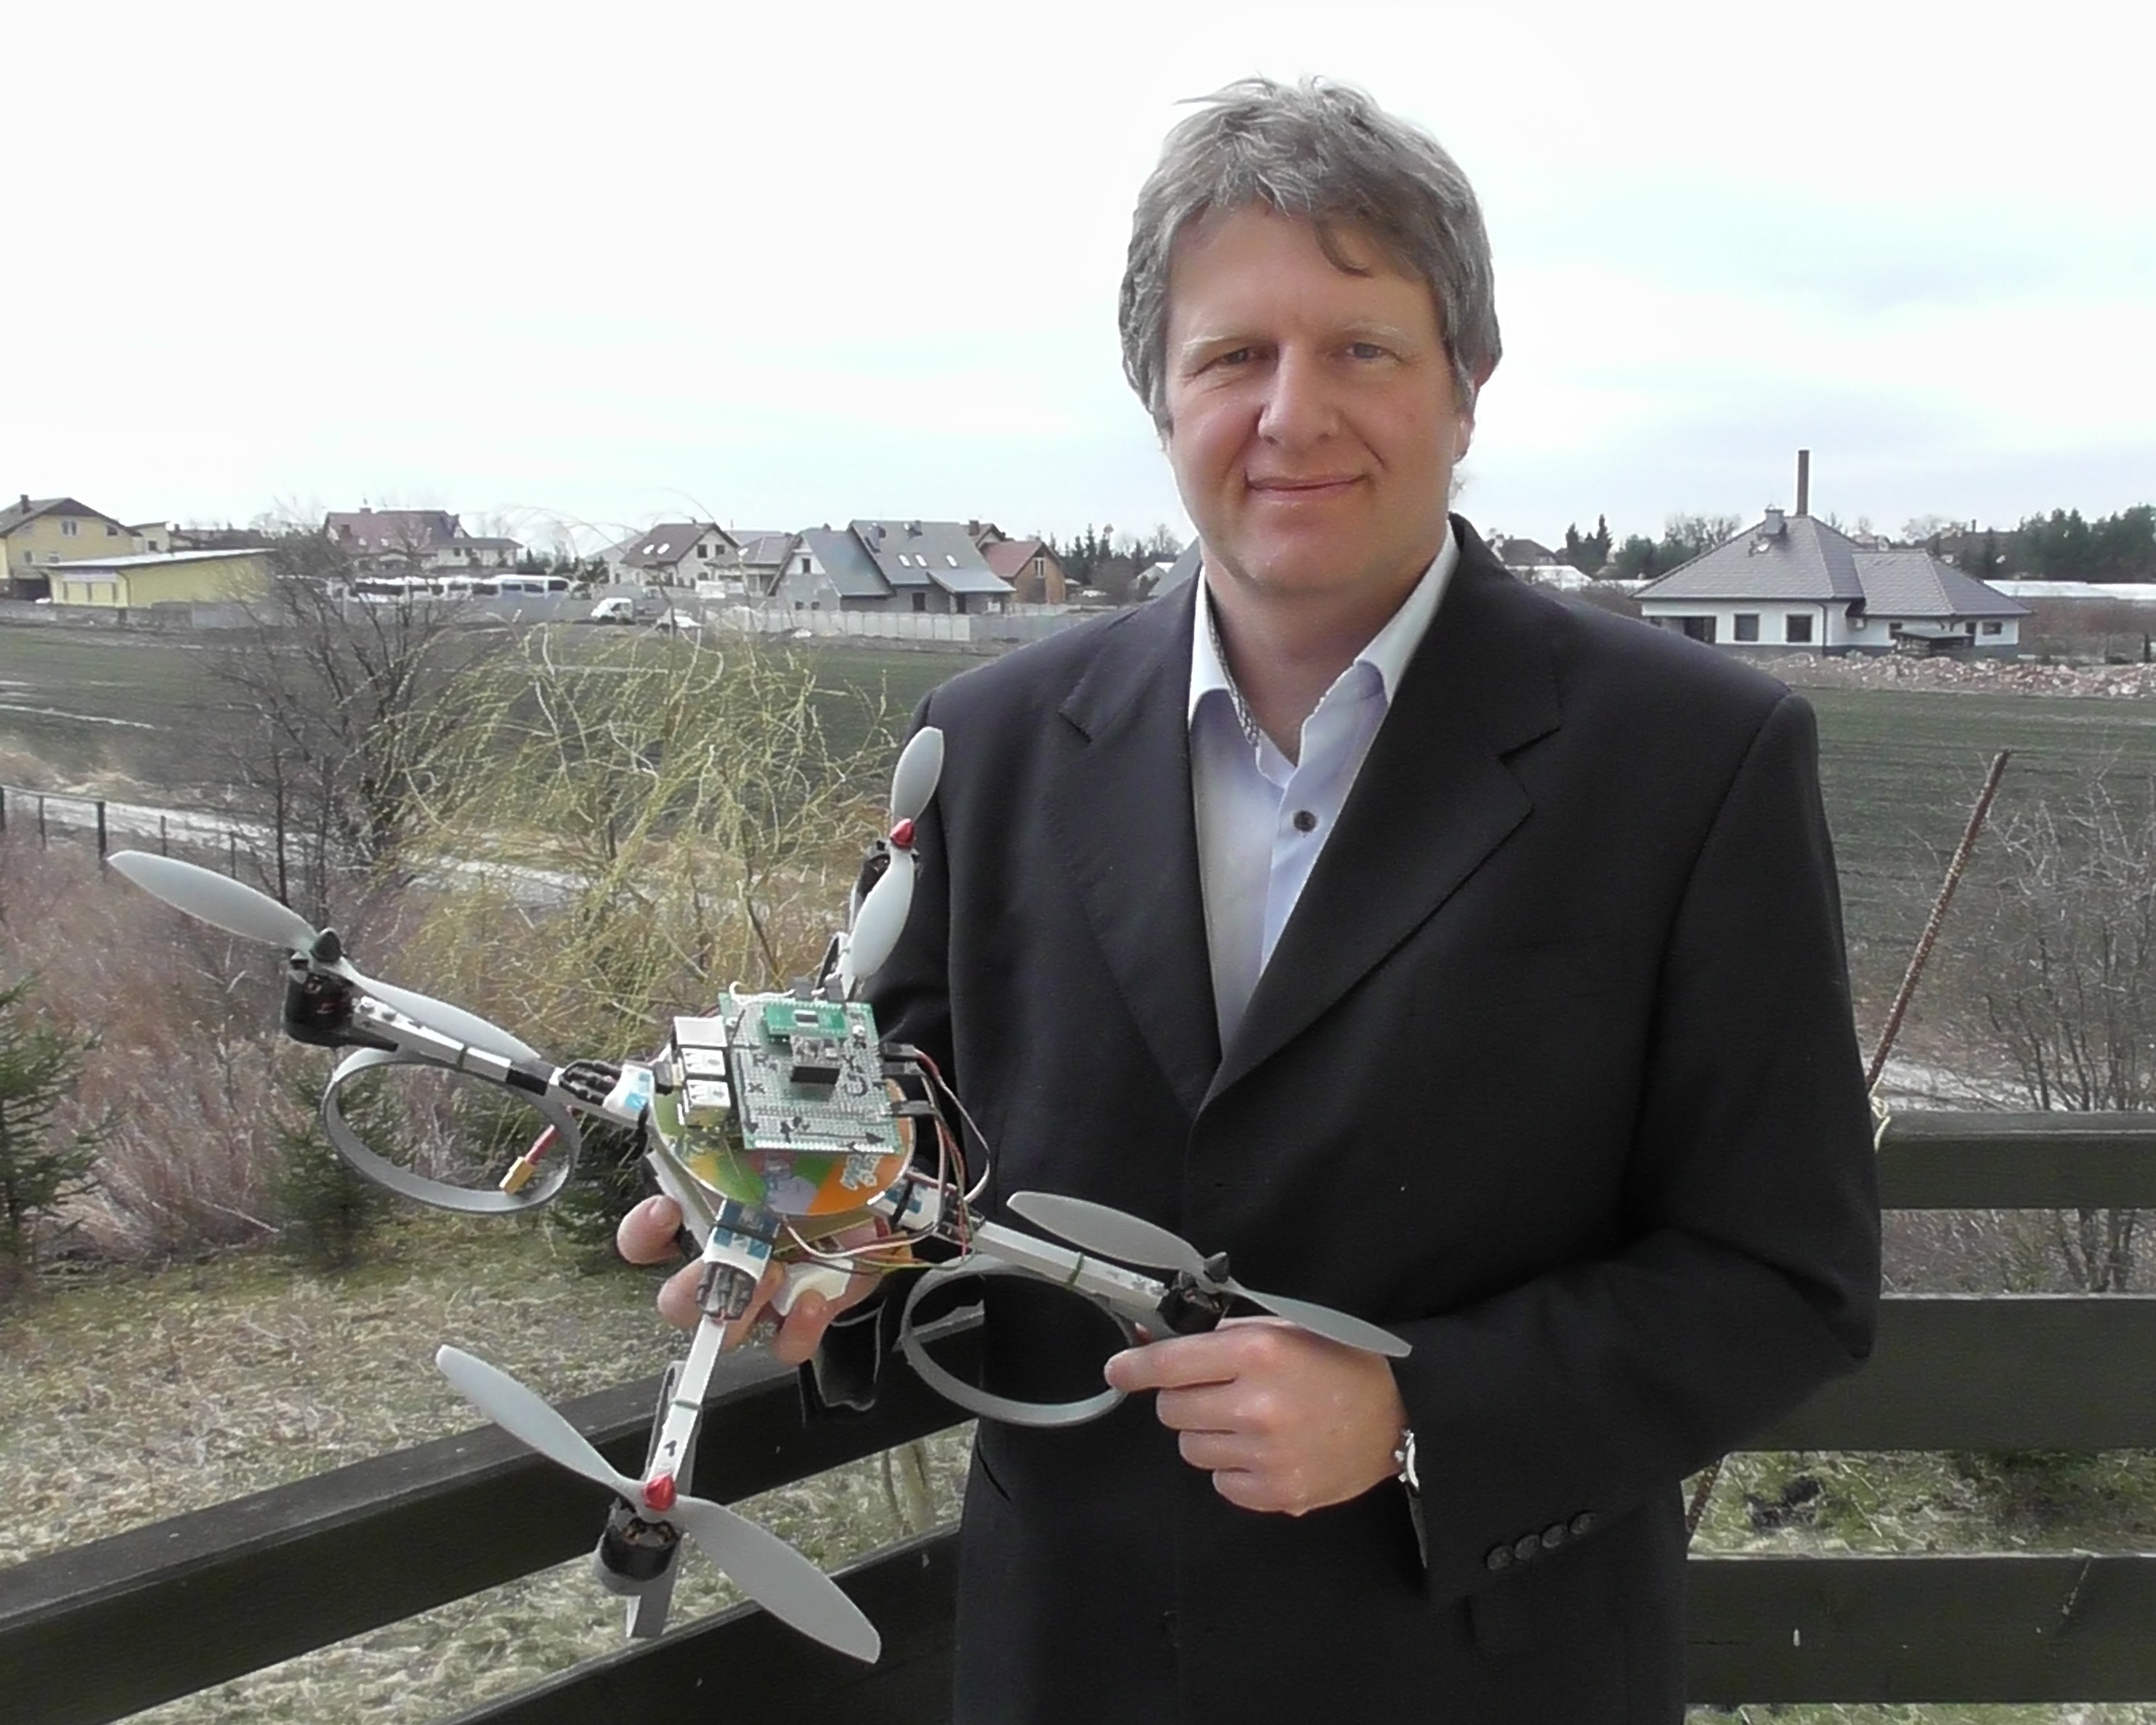 Sky Tronic develops the system to stabilise and enable the safe flight of drones – Mamstartup.pl